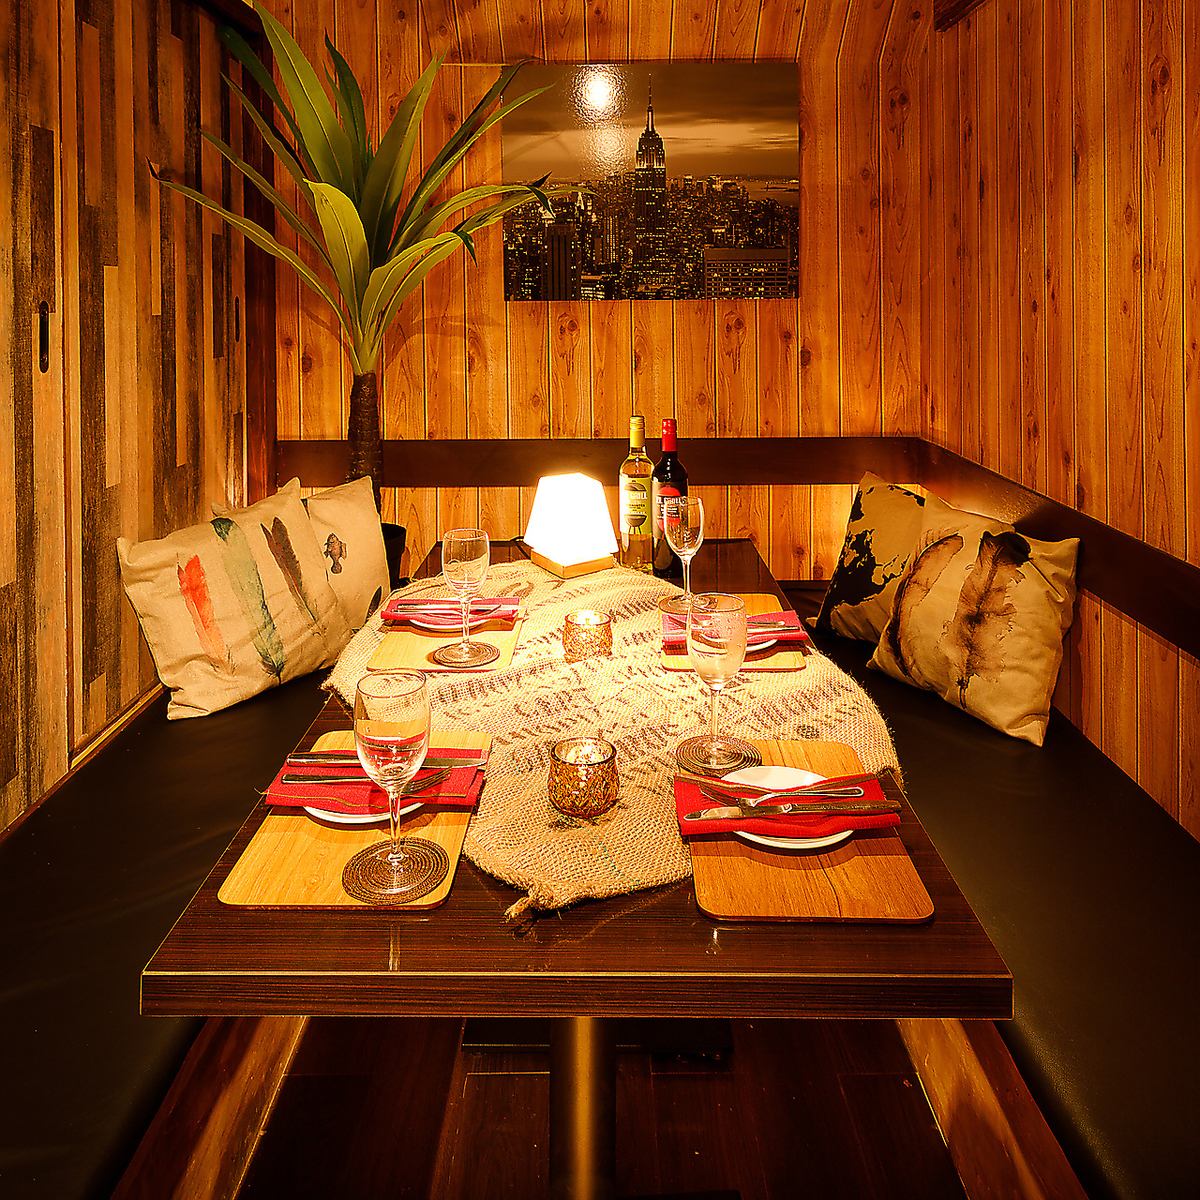 All-you-can-eat grilled meat sushi at an izakaya with private rooms!